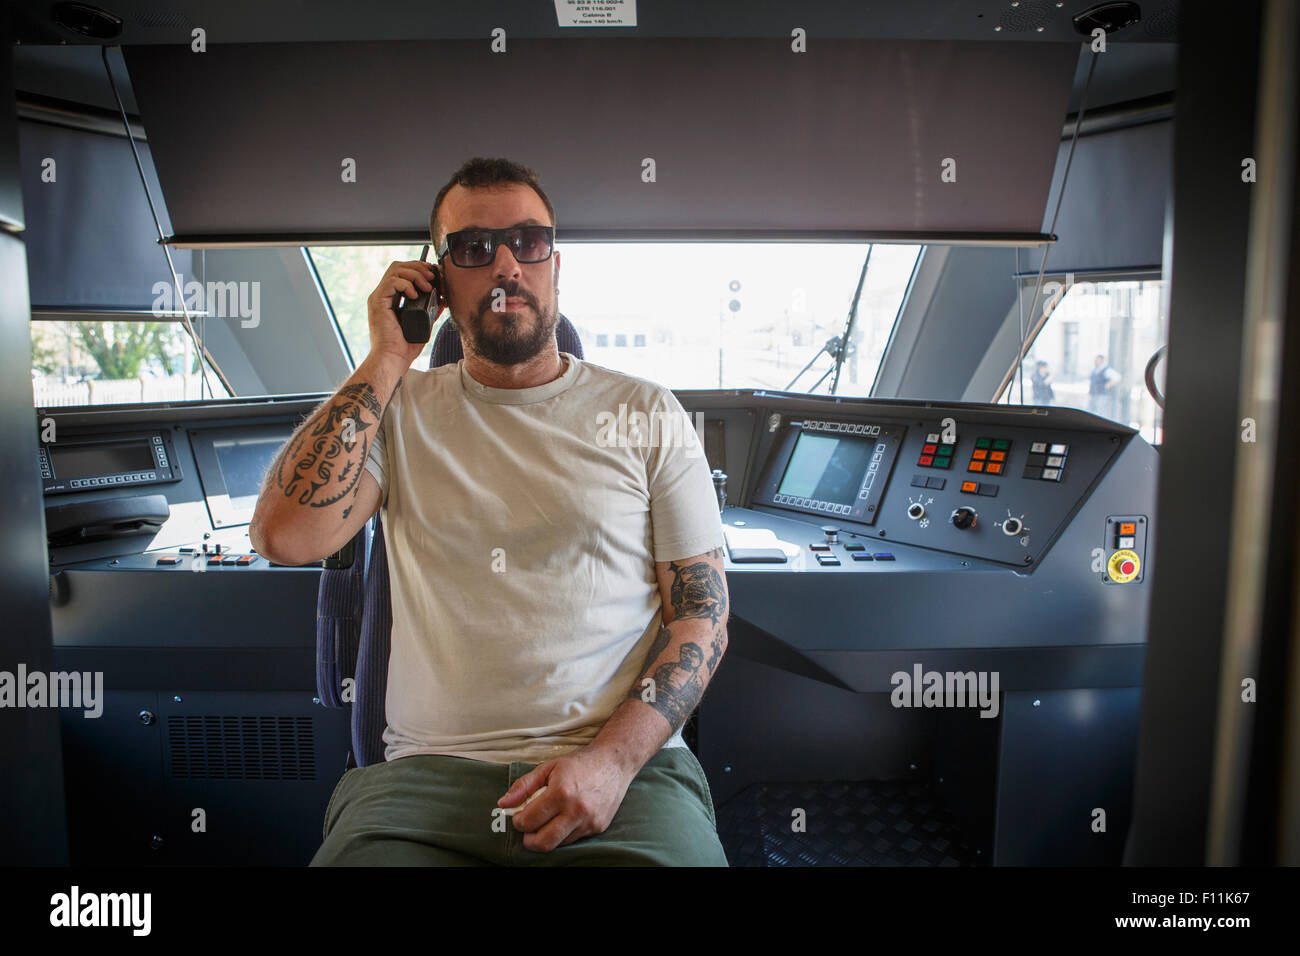 Caucasian man talking on cell phone in command center Stock Photo